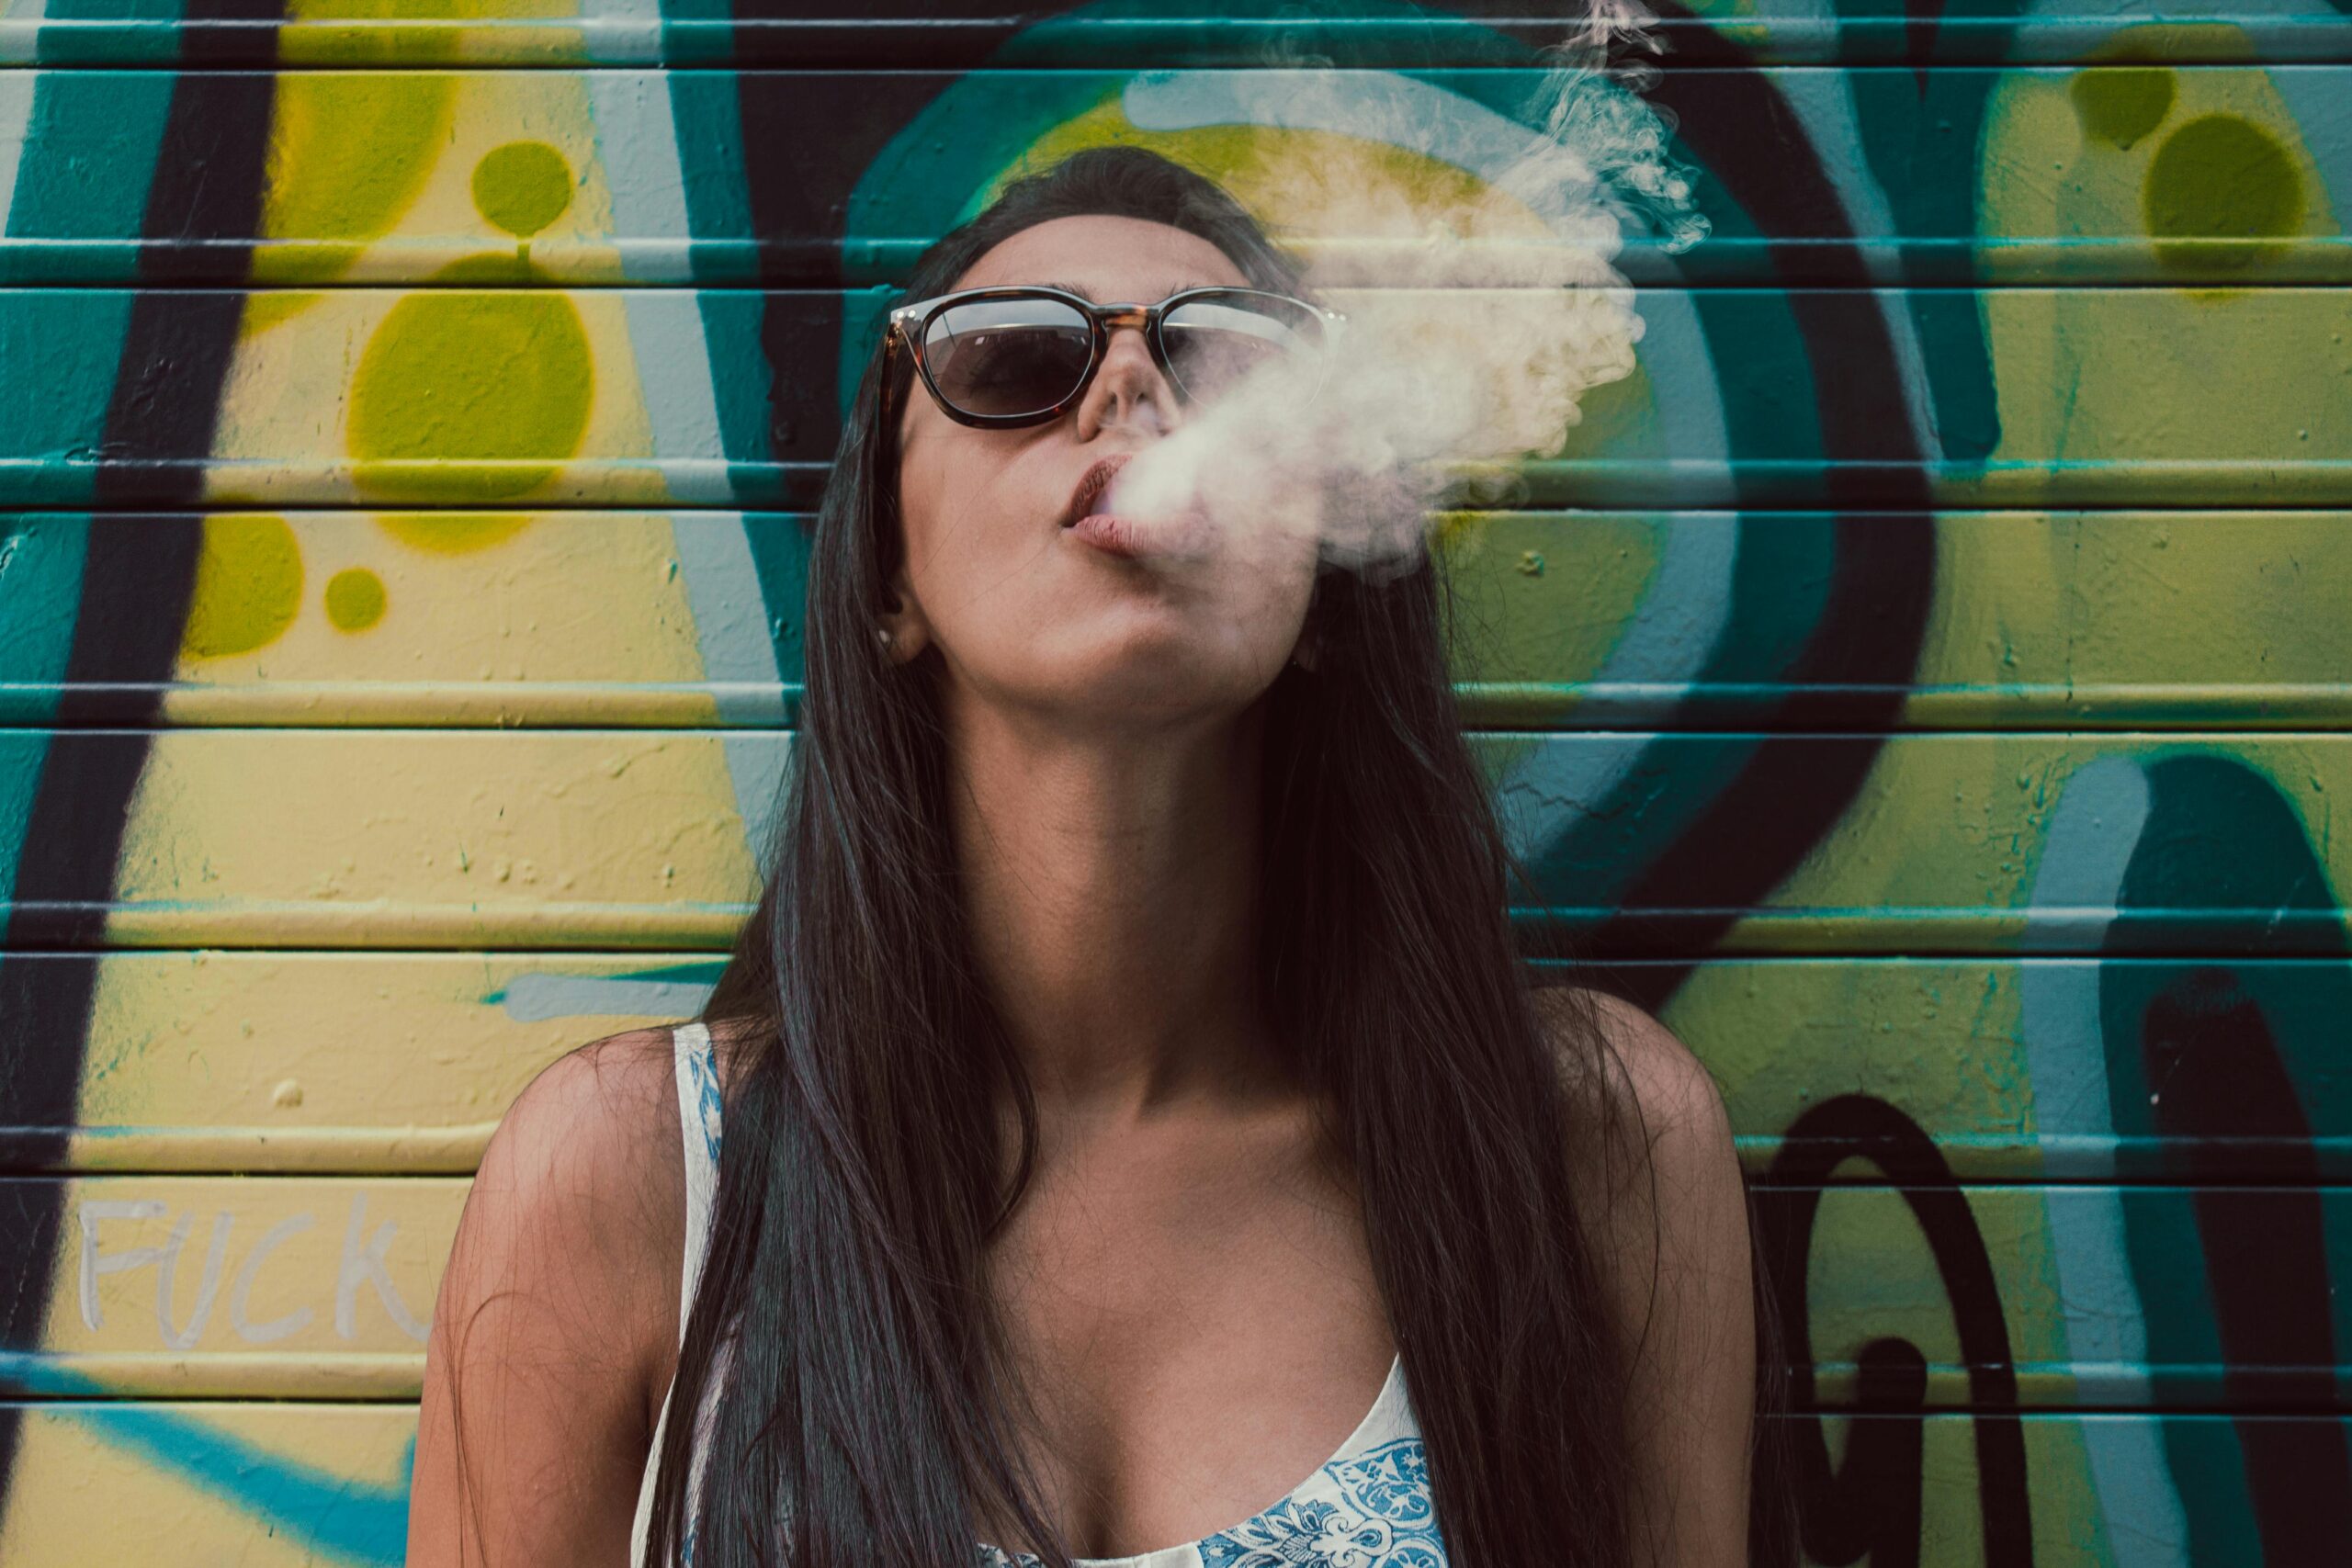 Woman exhaling smoke in front of a graffiti-covered wall.